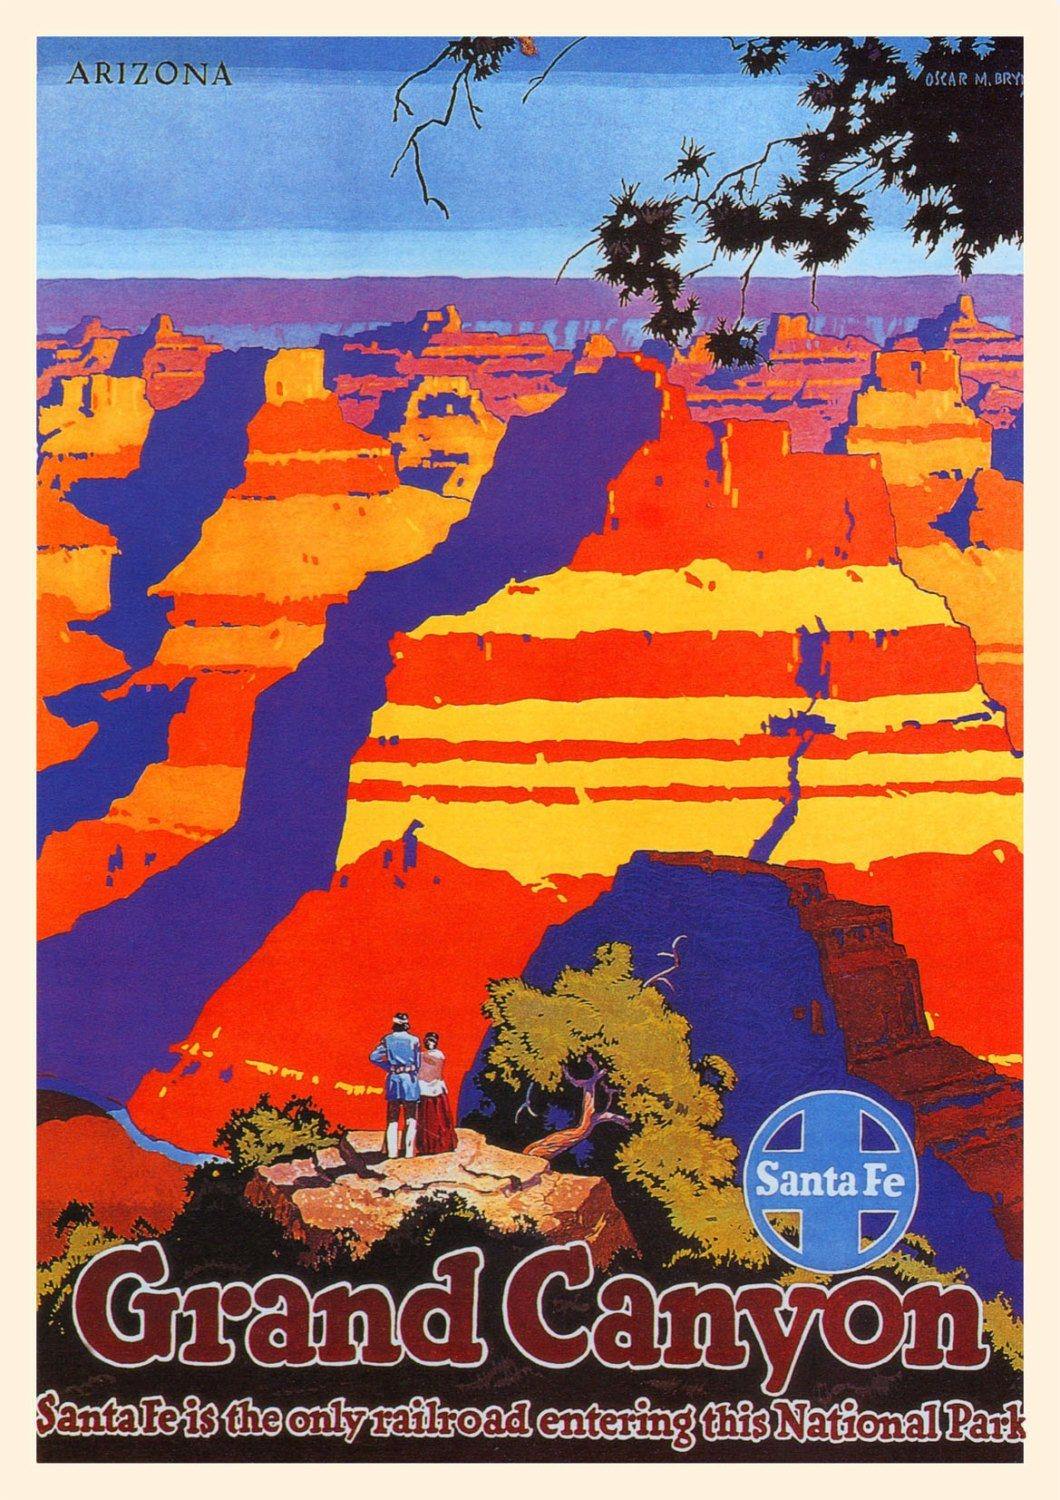 GRAND CANYON POSTER: Vintage Travel Advert, Red Art Print Wall Hanging - Pimlico Prints